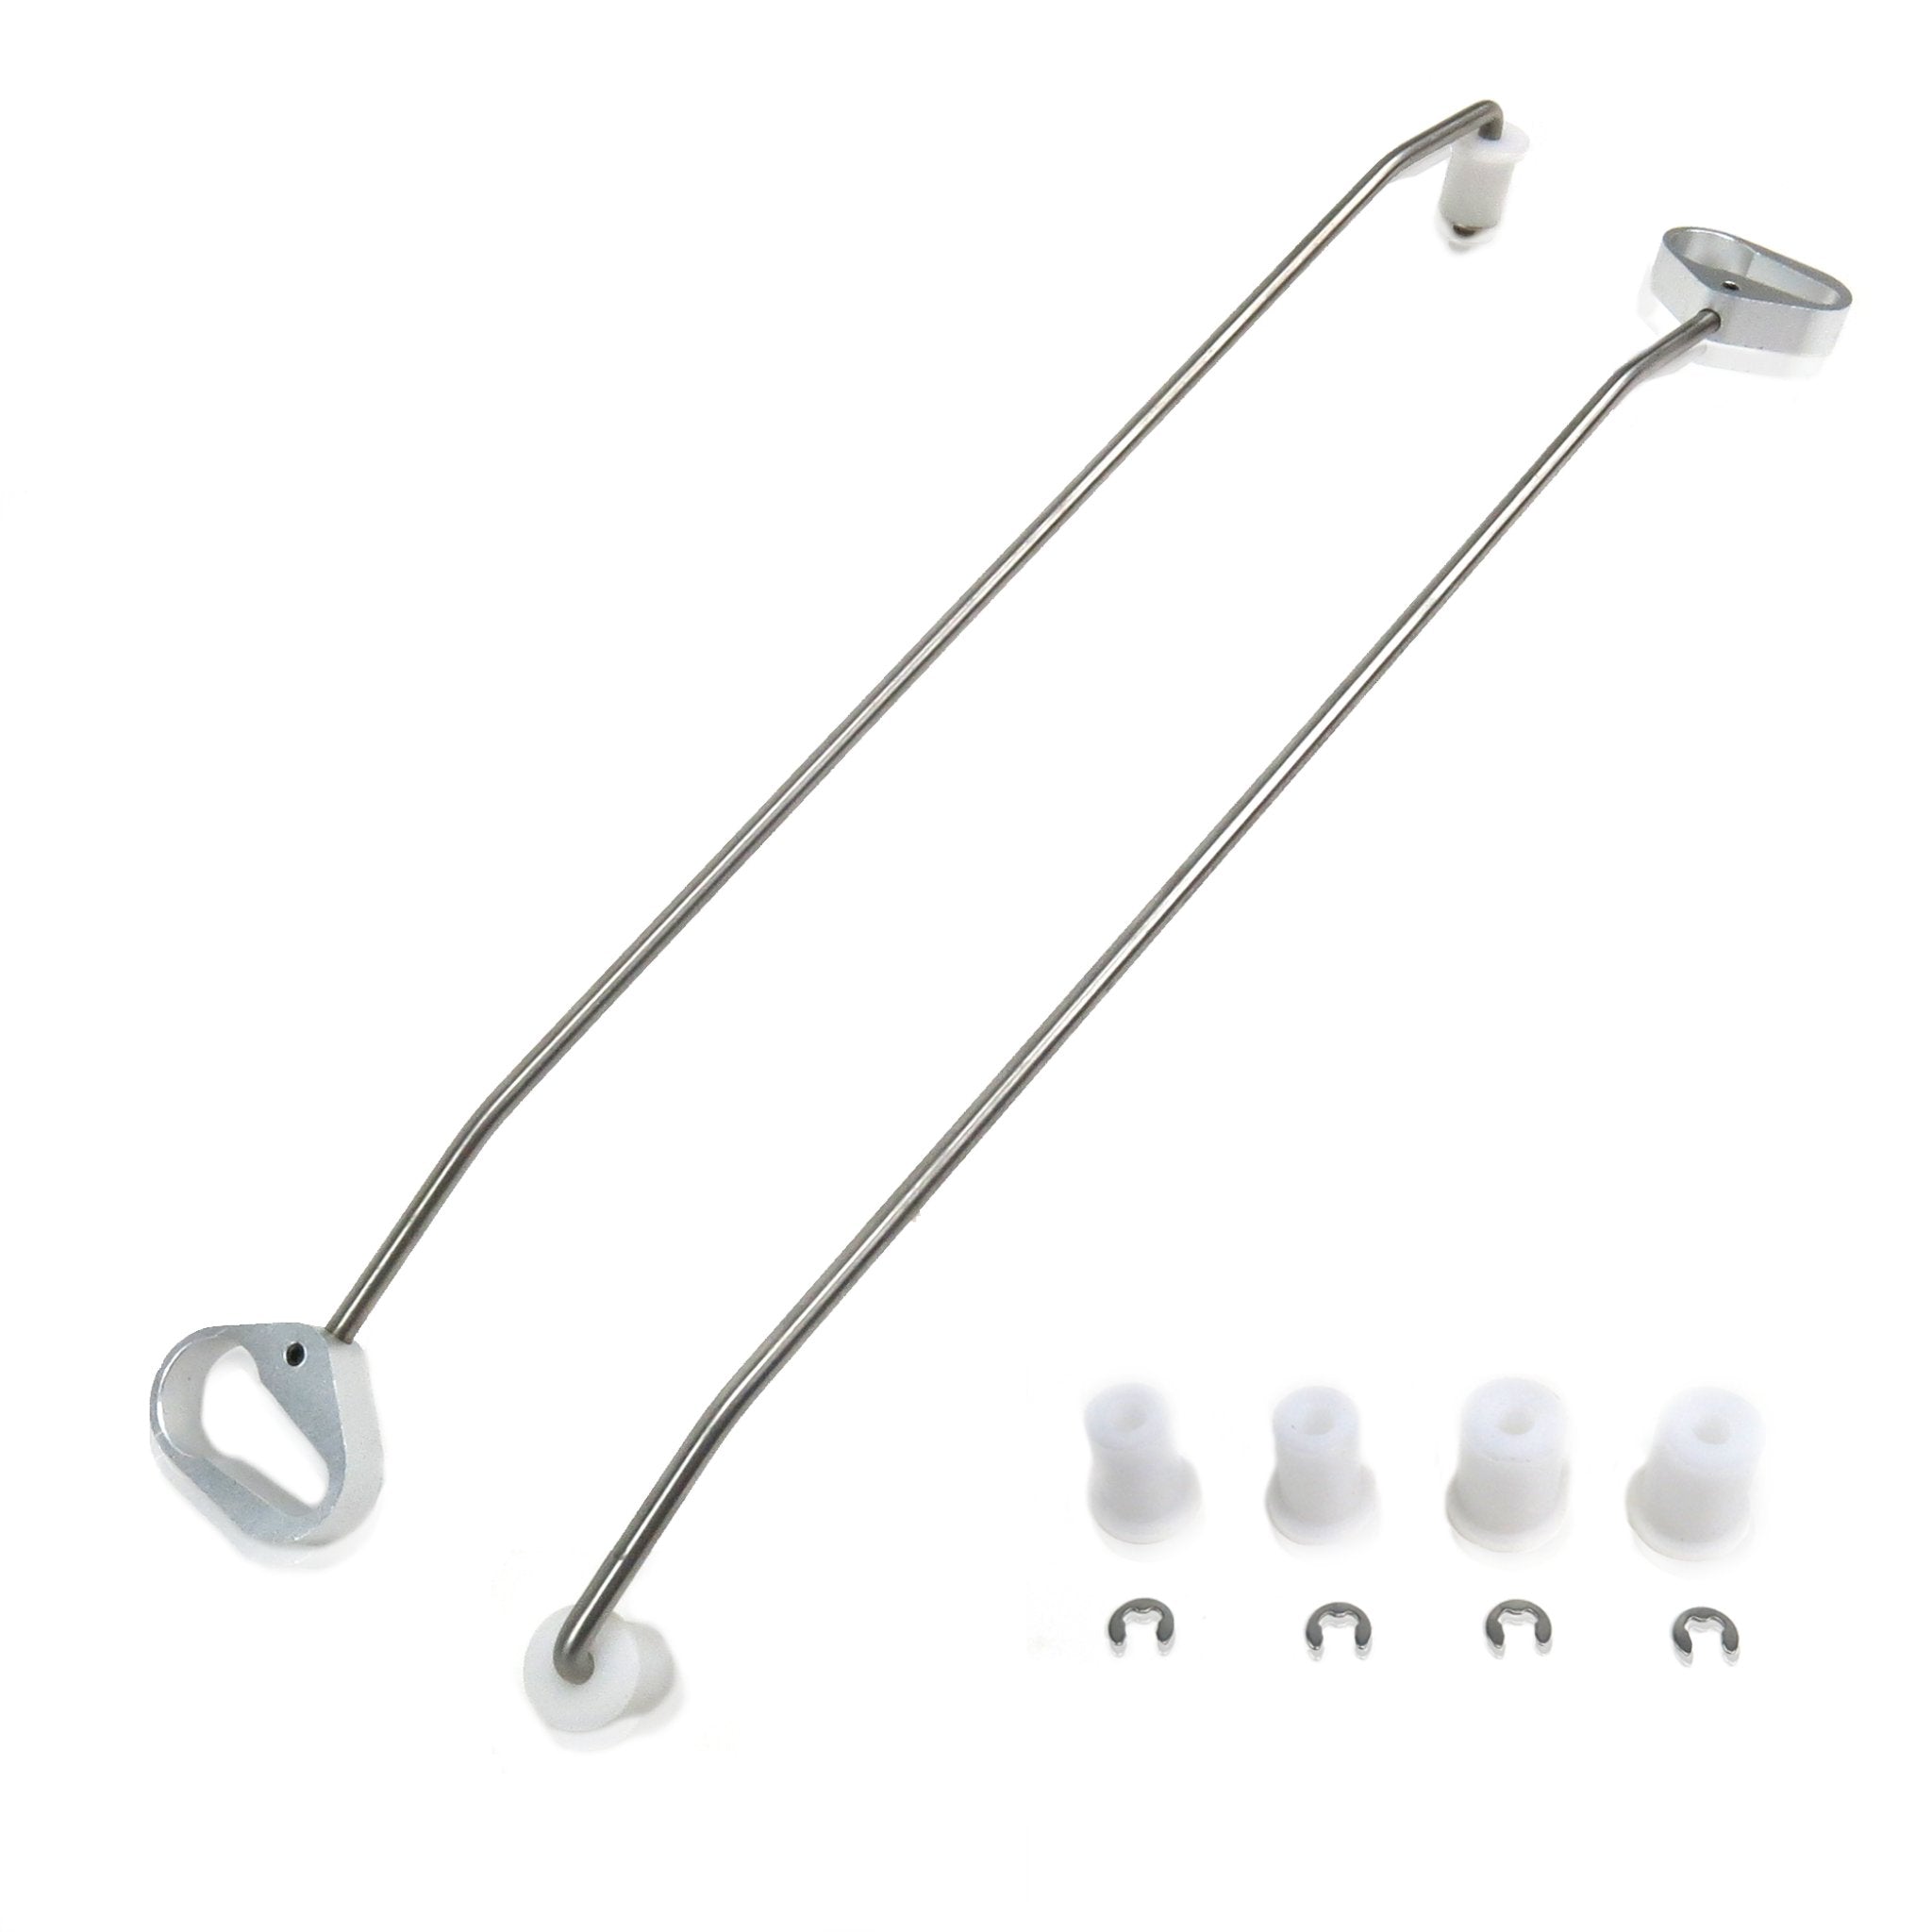 Stainless Steel Door Prop Open Rods Set Holds Latch for Shows Interior Display